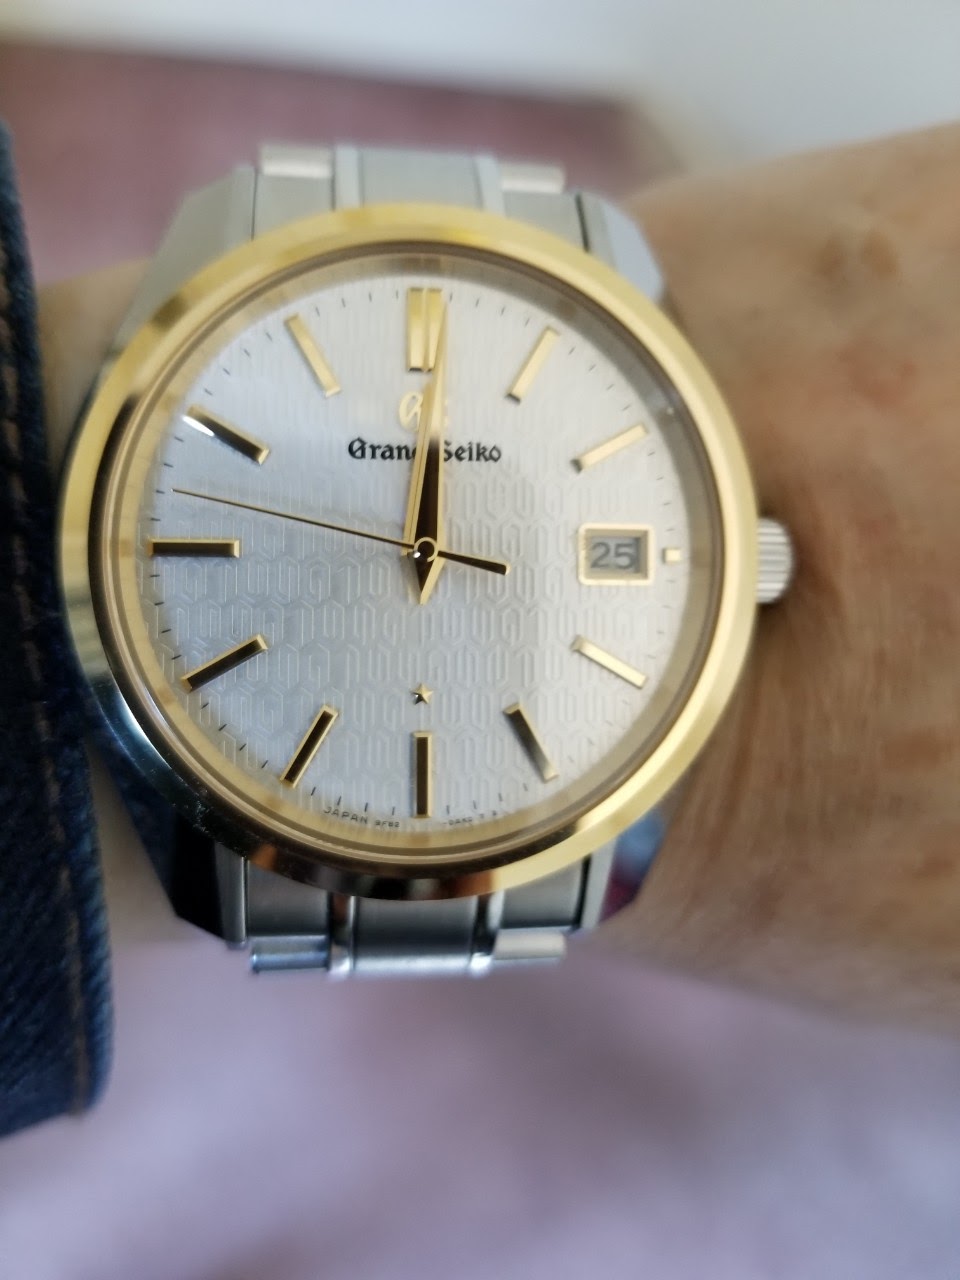 Seiko - The GS SBGV238G: Super nice craftsmanship and of course accuracy,  happy with my new purchase with Grand Seiko one more time.